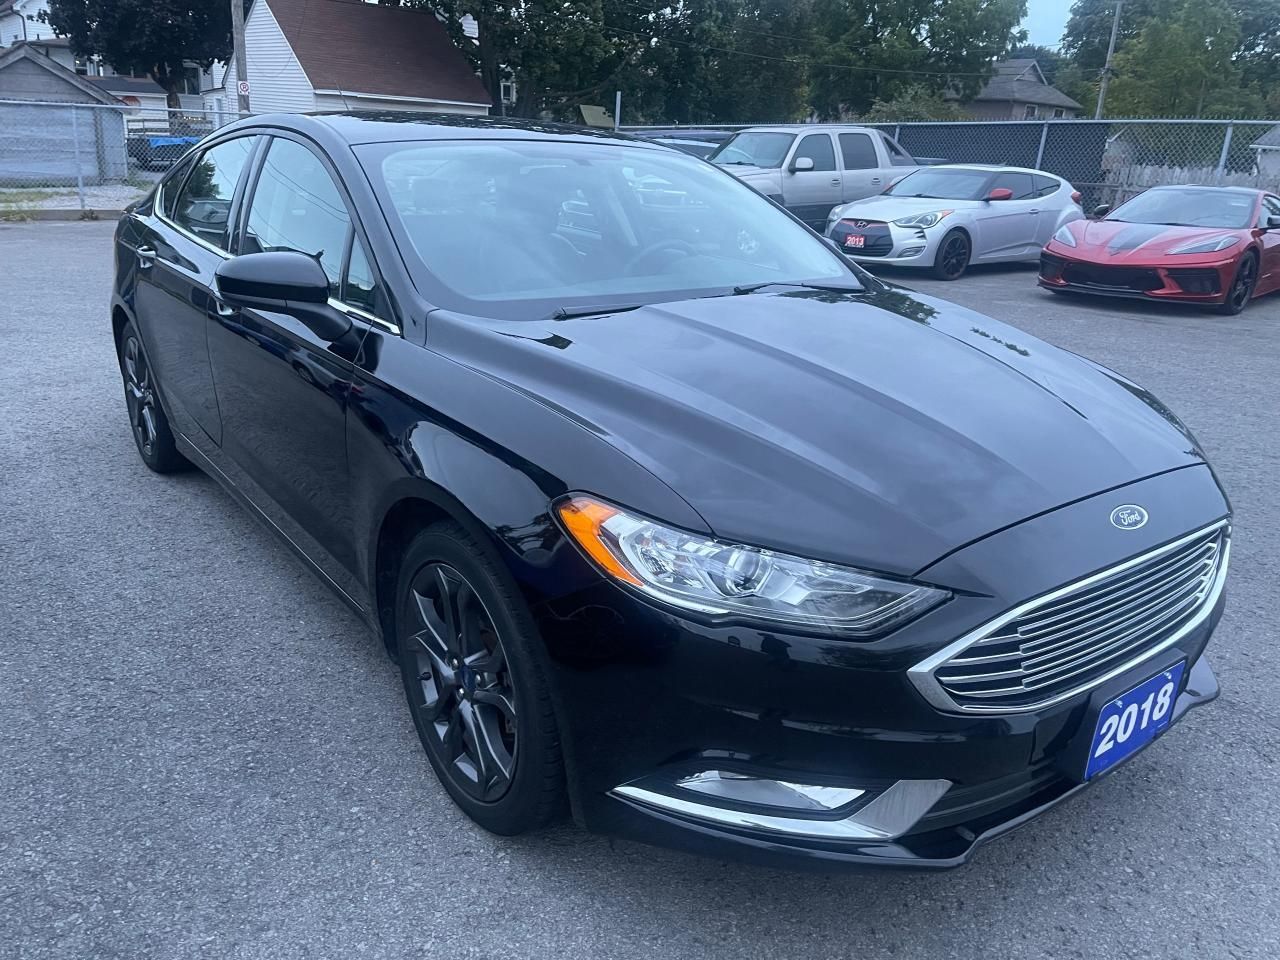 2018 Ford Fusion SE, Leather, Navigation, Push Start, Alloy wheels